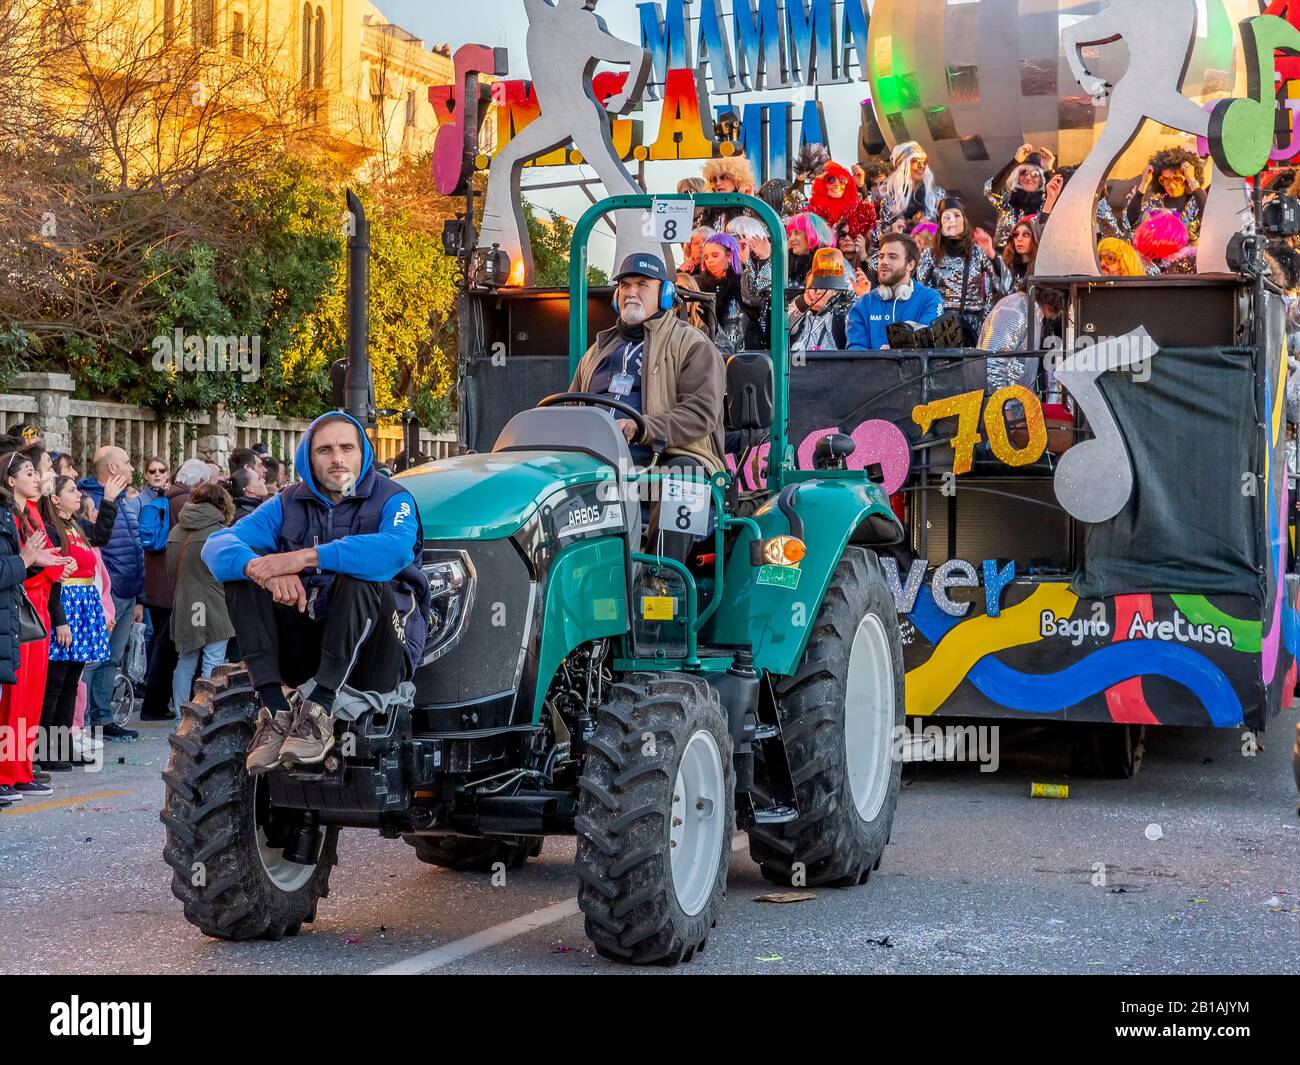 Workers of the Carnival of Viareggio, Italy, take care of the tractor that carries the allegorical float in a parade Stock Photo